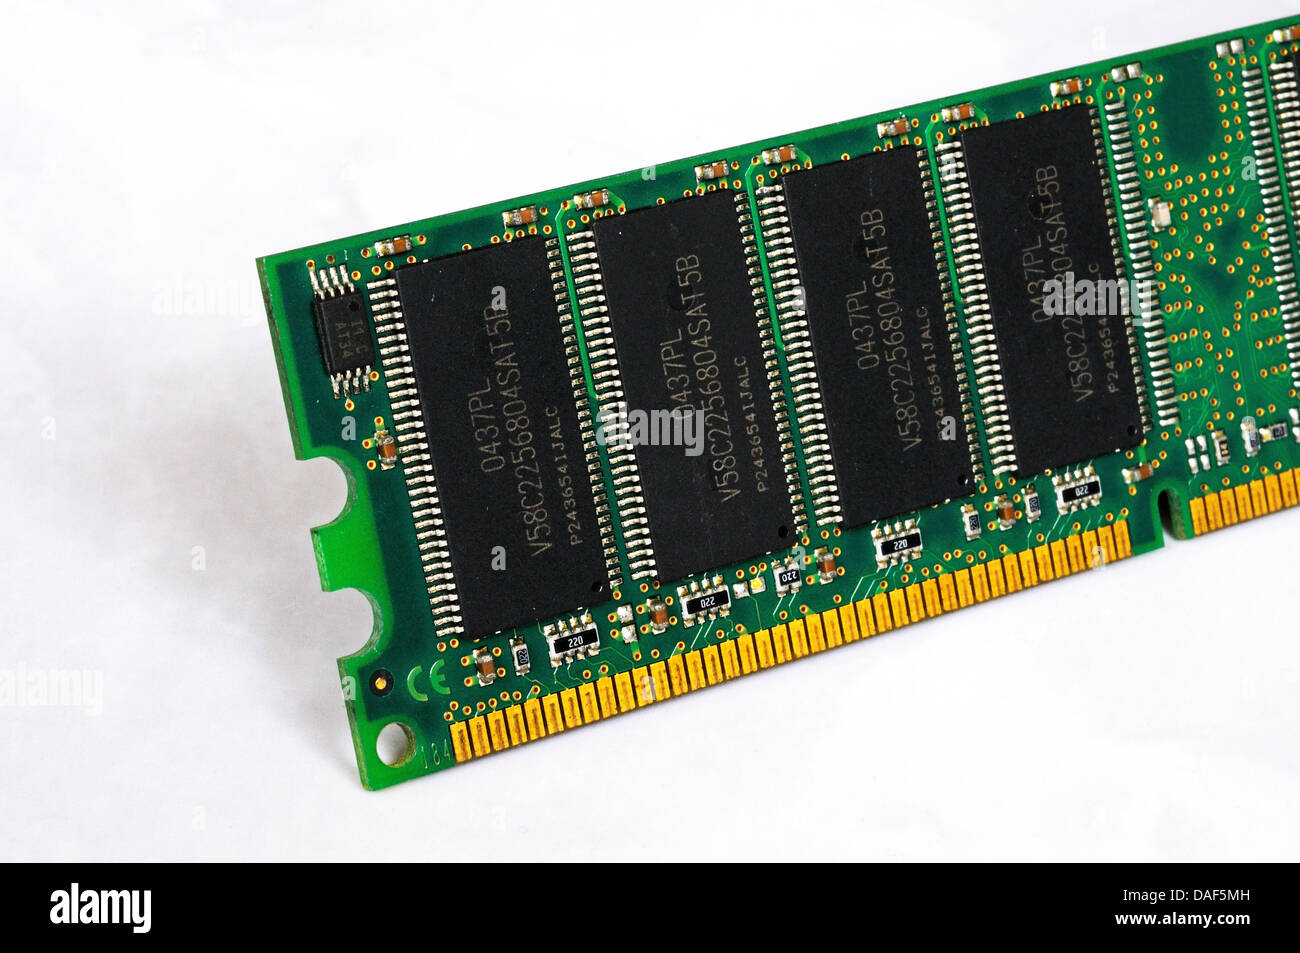 DIMM RAM, Dual Inline Memory Module, dynamic random access memory circuits for PC's, Workstations and Servers. Stock Photo